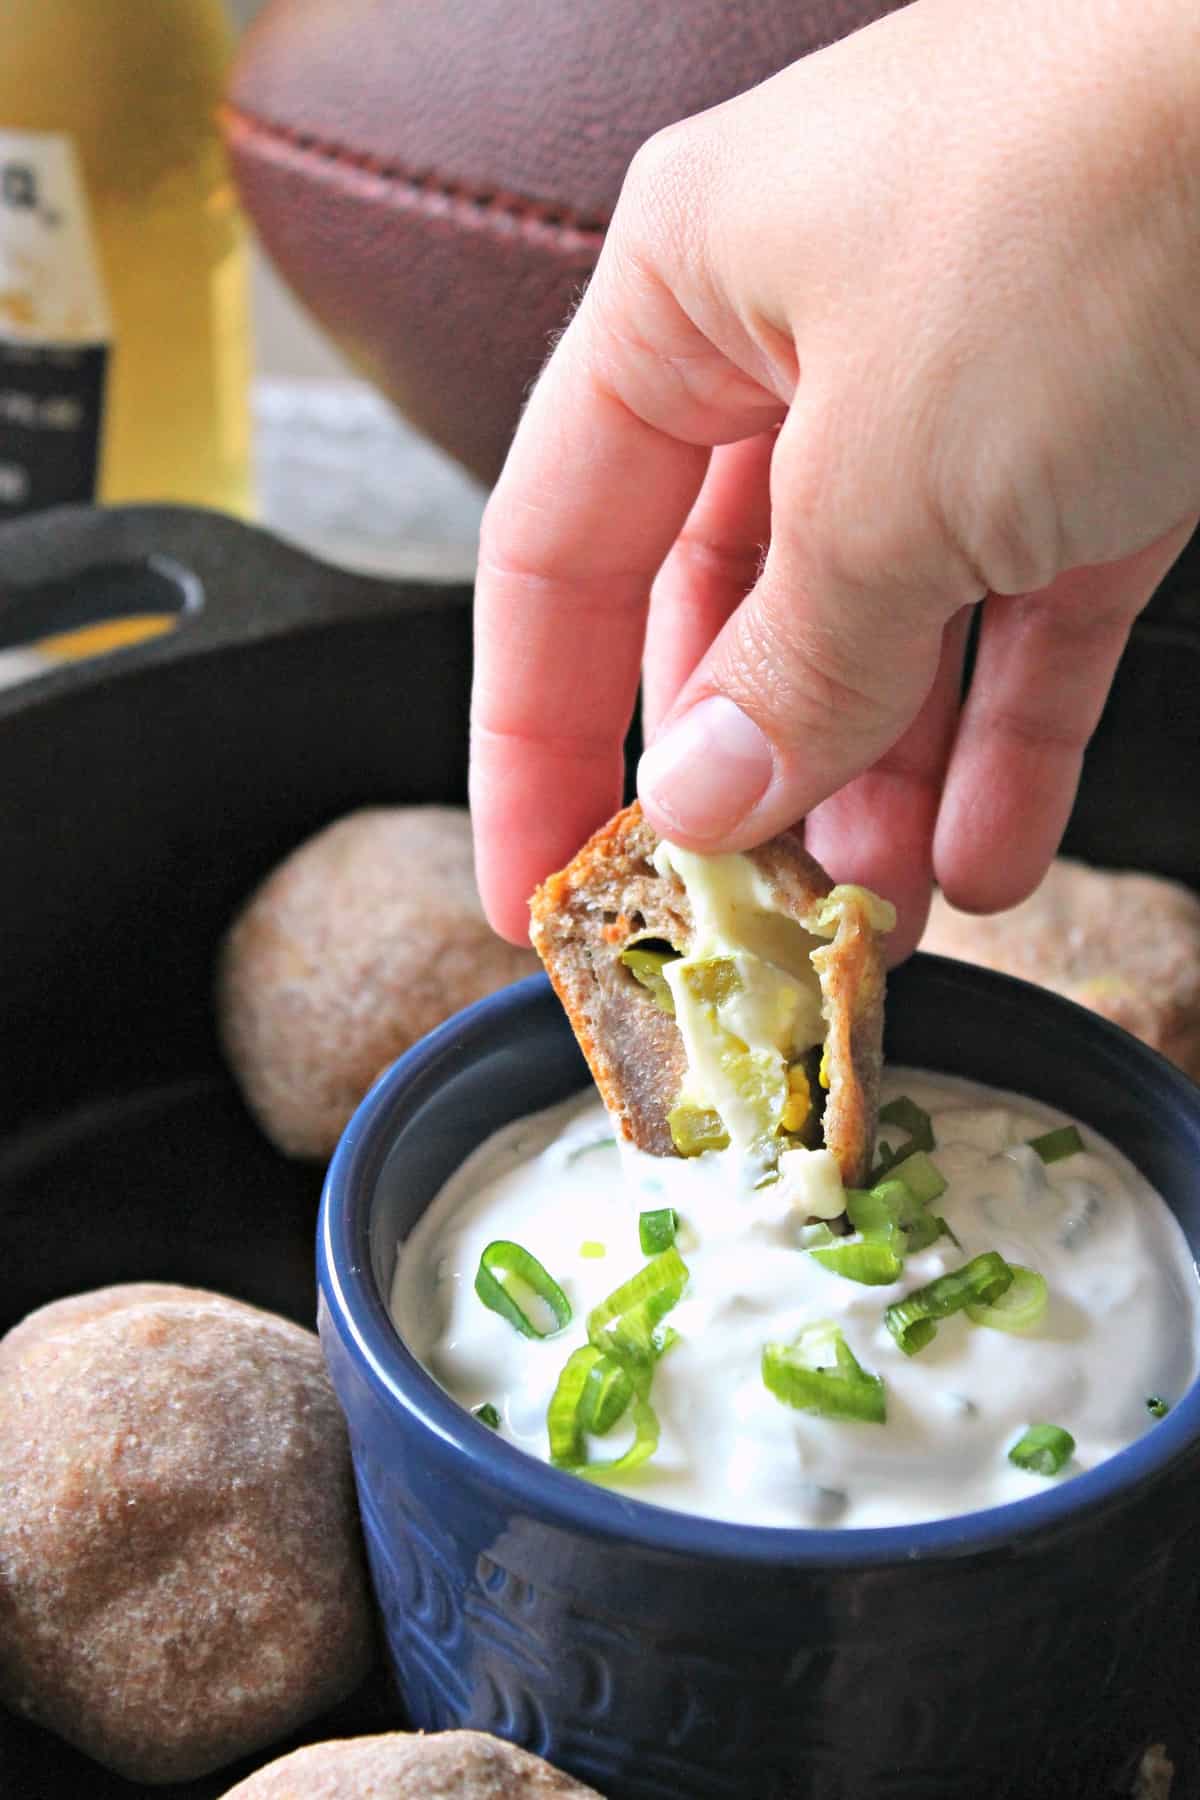 Easy jalapeno bombs have a cheesy kick that make these poppable snacks perfect for a tailgate party